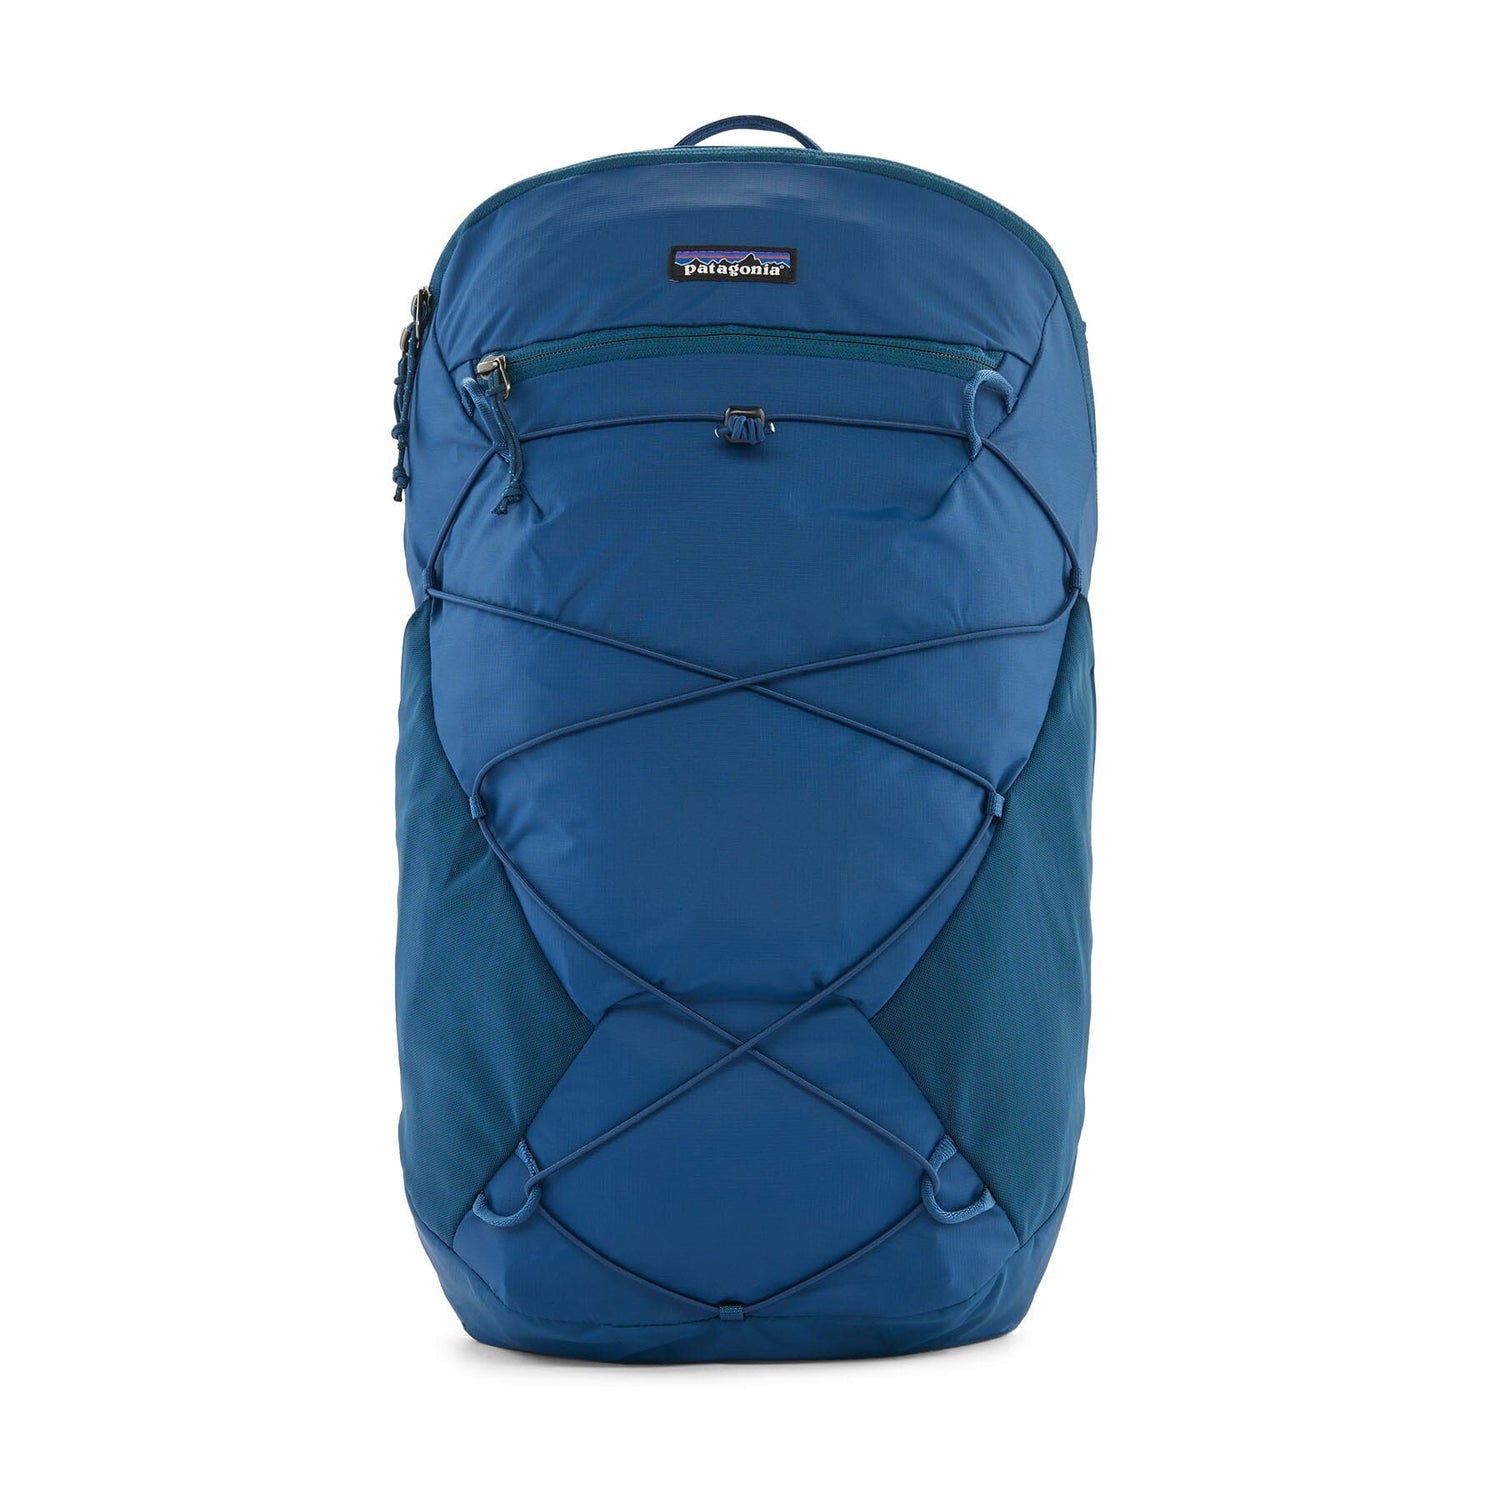 Patagonia Terravia Pack 22L - 100% Recycled Nylon Lagom Blue Bags